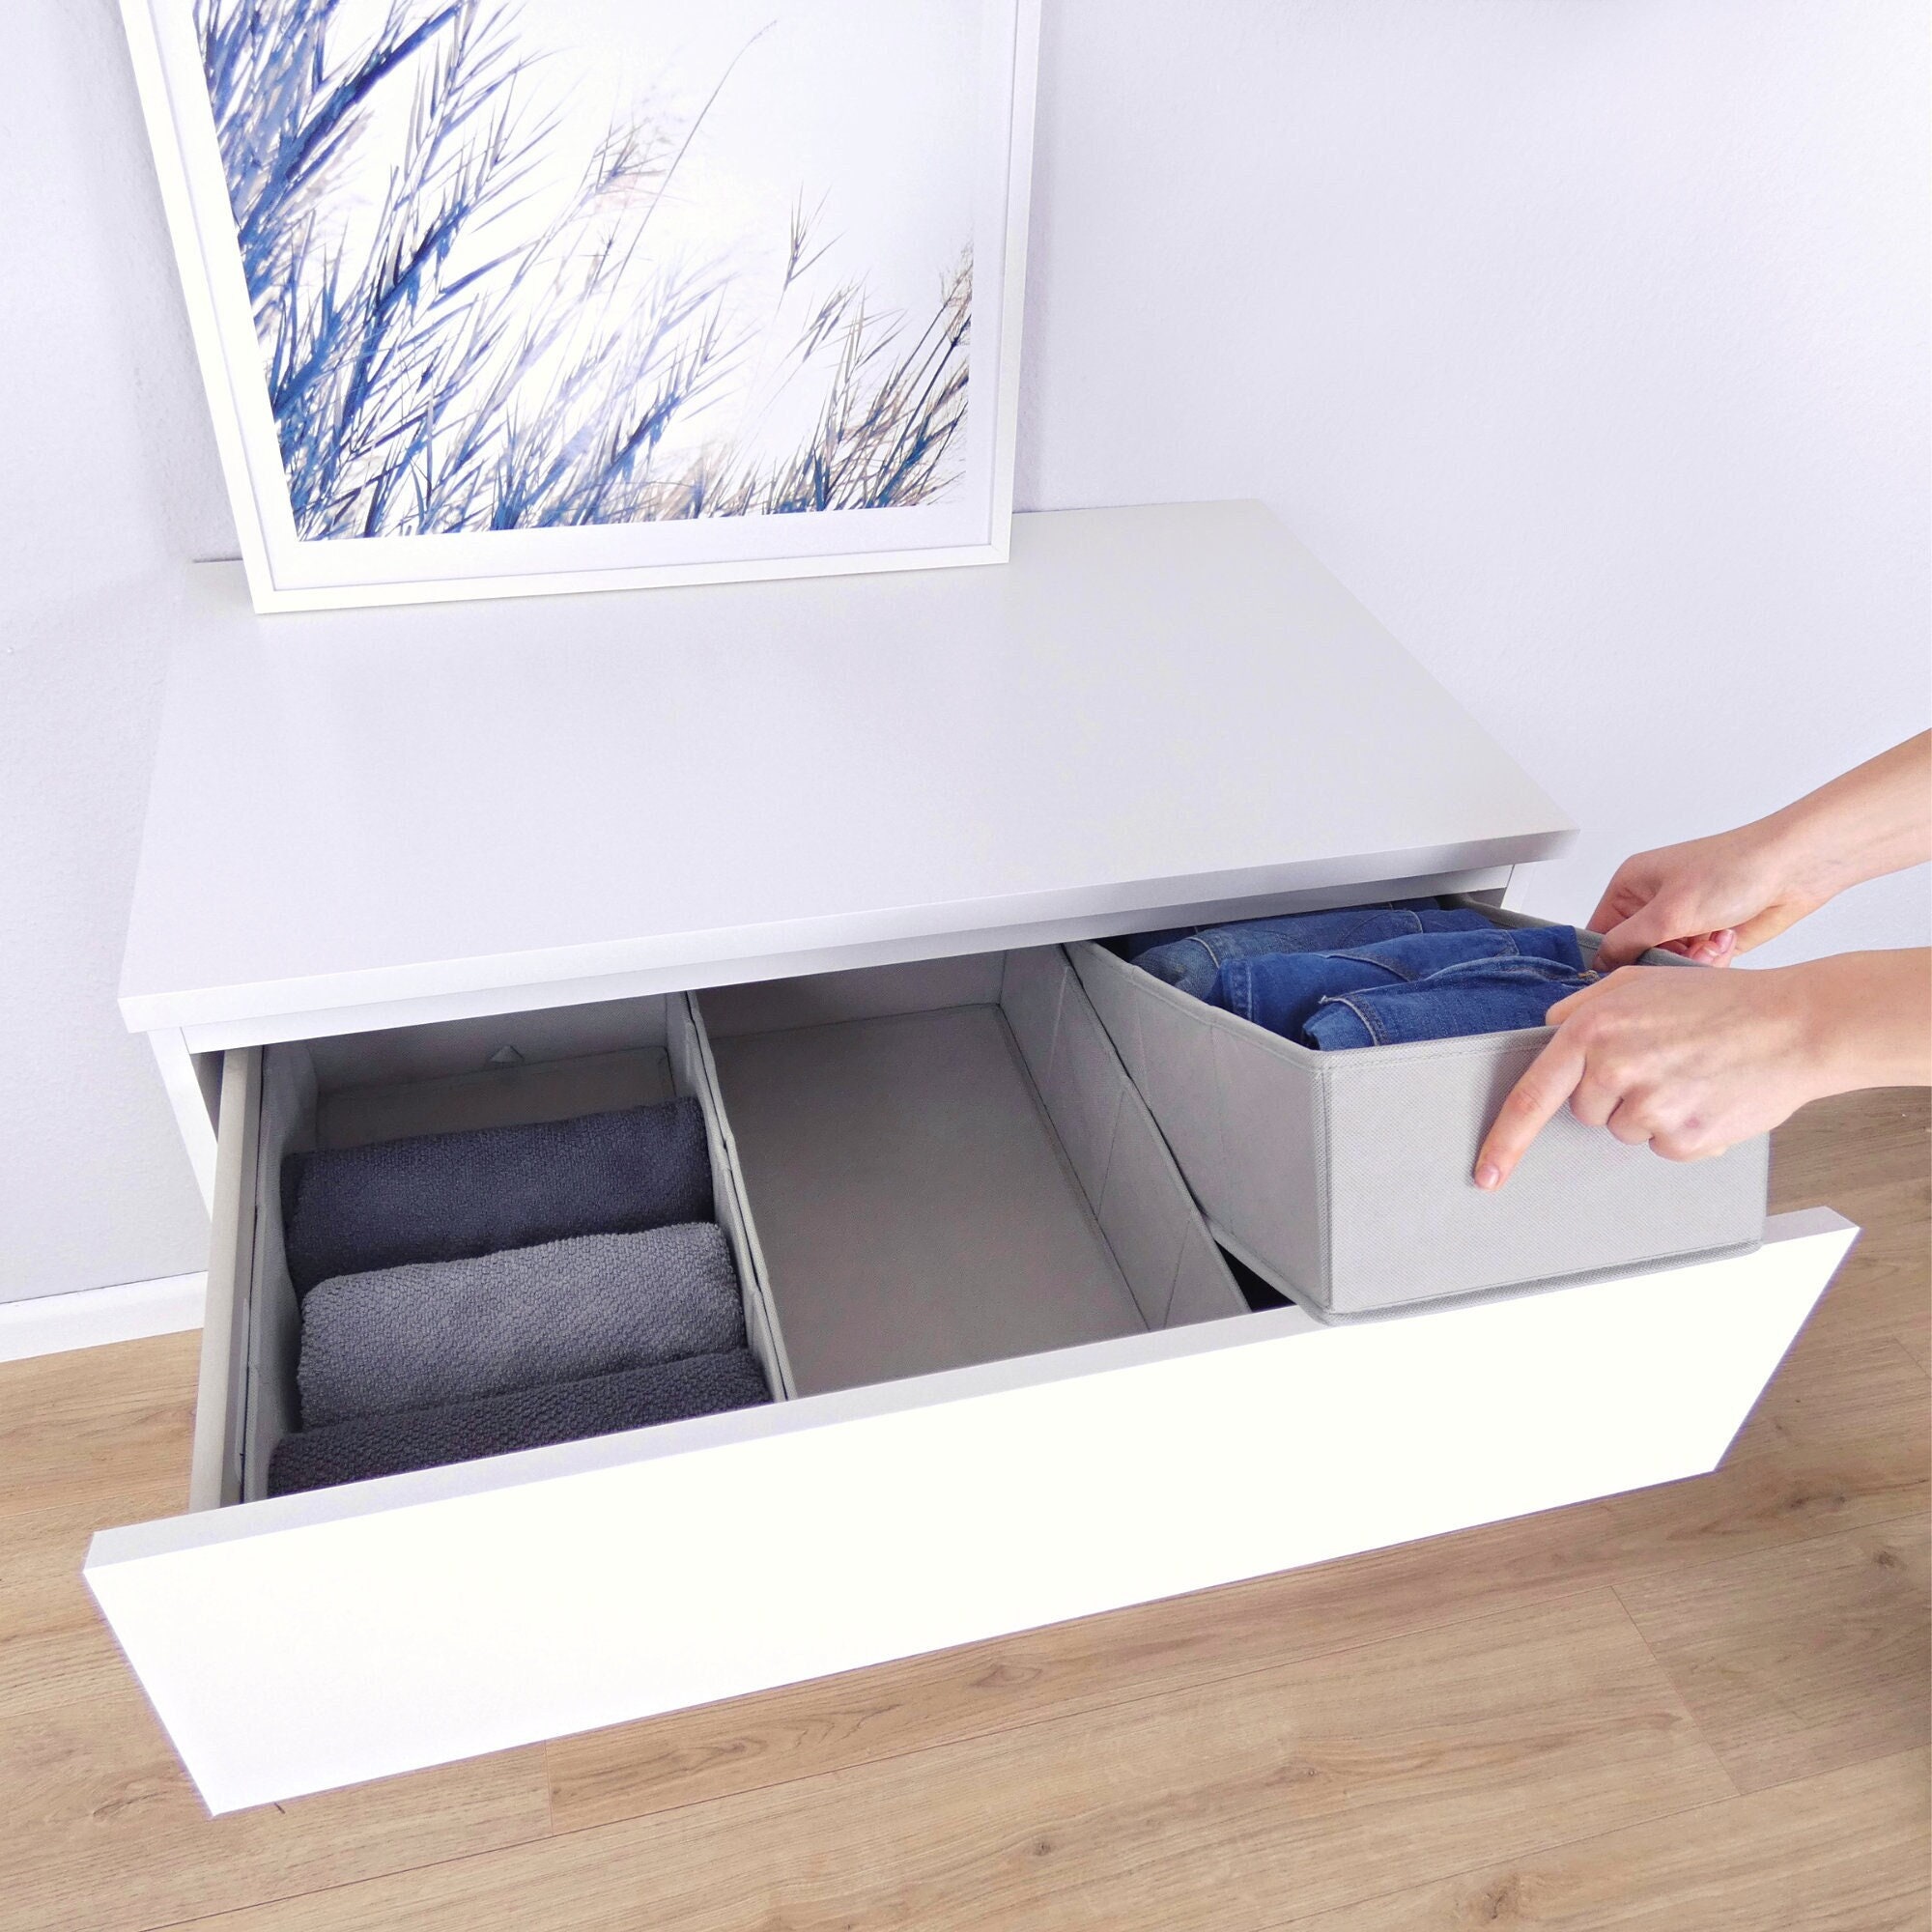 Organizers System Sorting Etsy for Drawers, 3 13 Organization for Malm Drawers, of X 42 of Cm Set Boxes, T-shirts, X IKEA Socks Chest for - Denmark Underwear, 23 Boxes